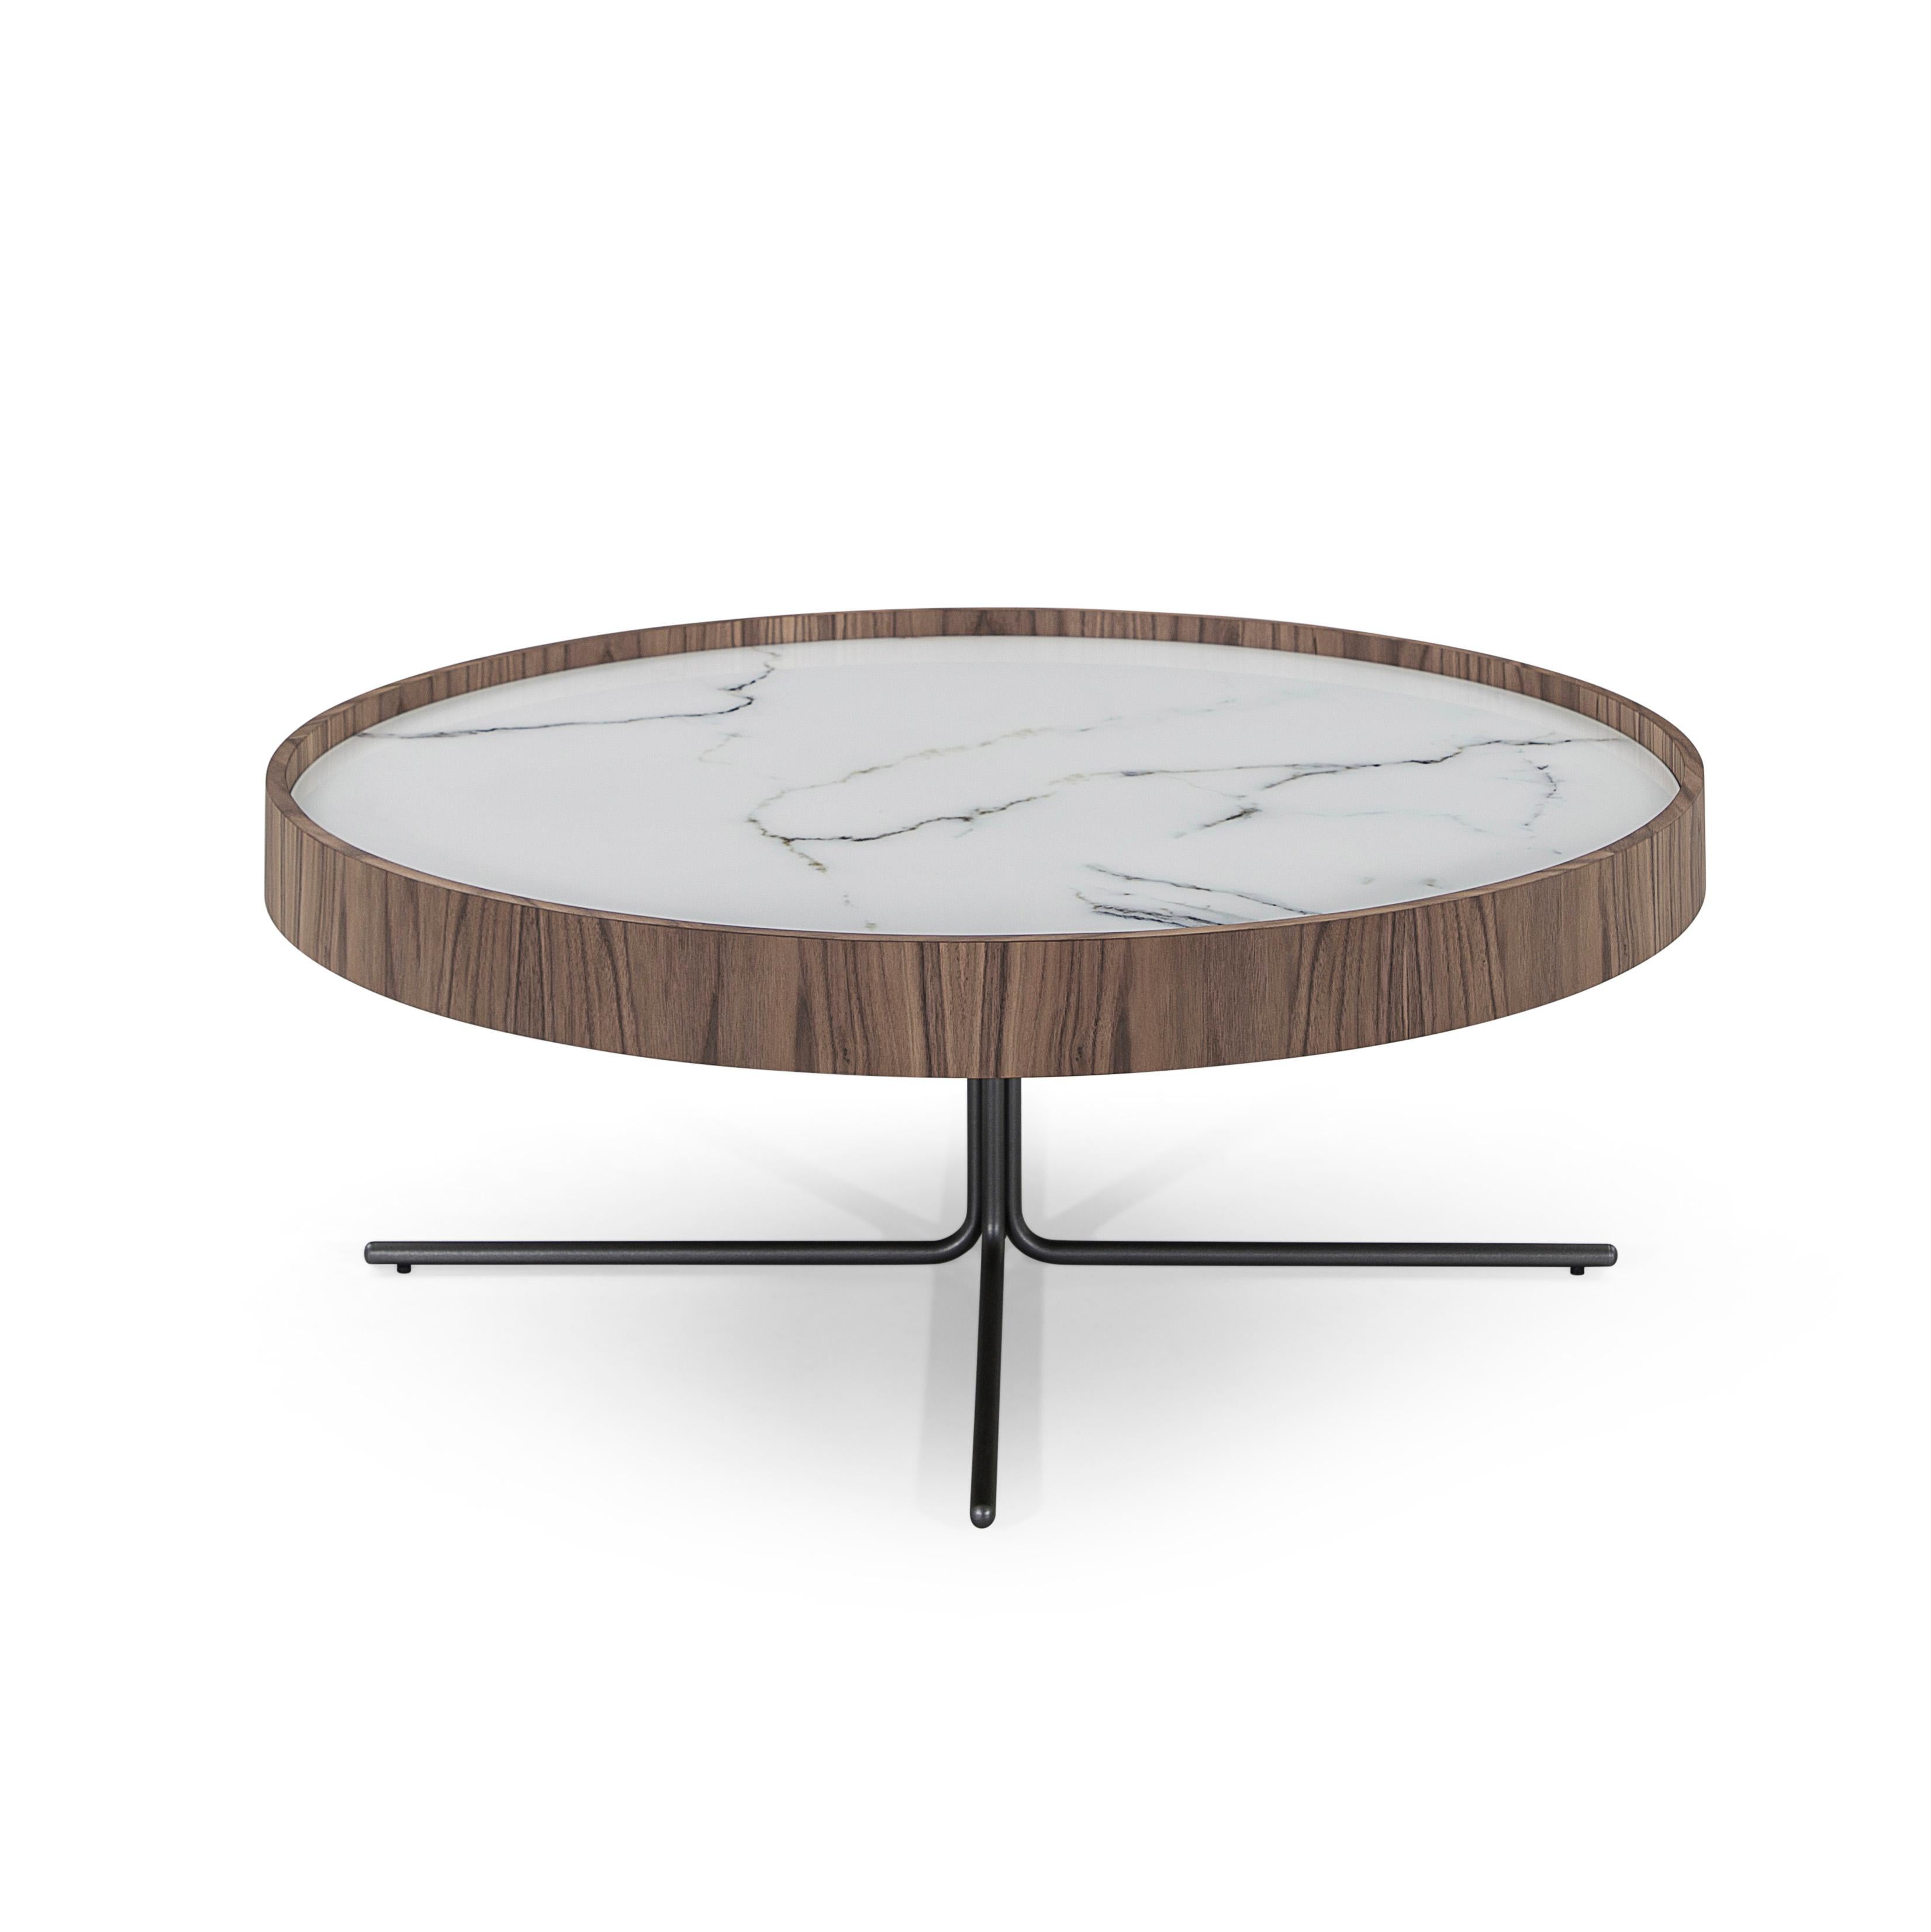 The stunning Regia occasional tables consist of a set of two tables with varying diameters and heights. The tabletop is white glass that imitates a beautiful white marble with black veins running through it. Combined with a walnut rim and stainless